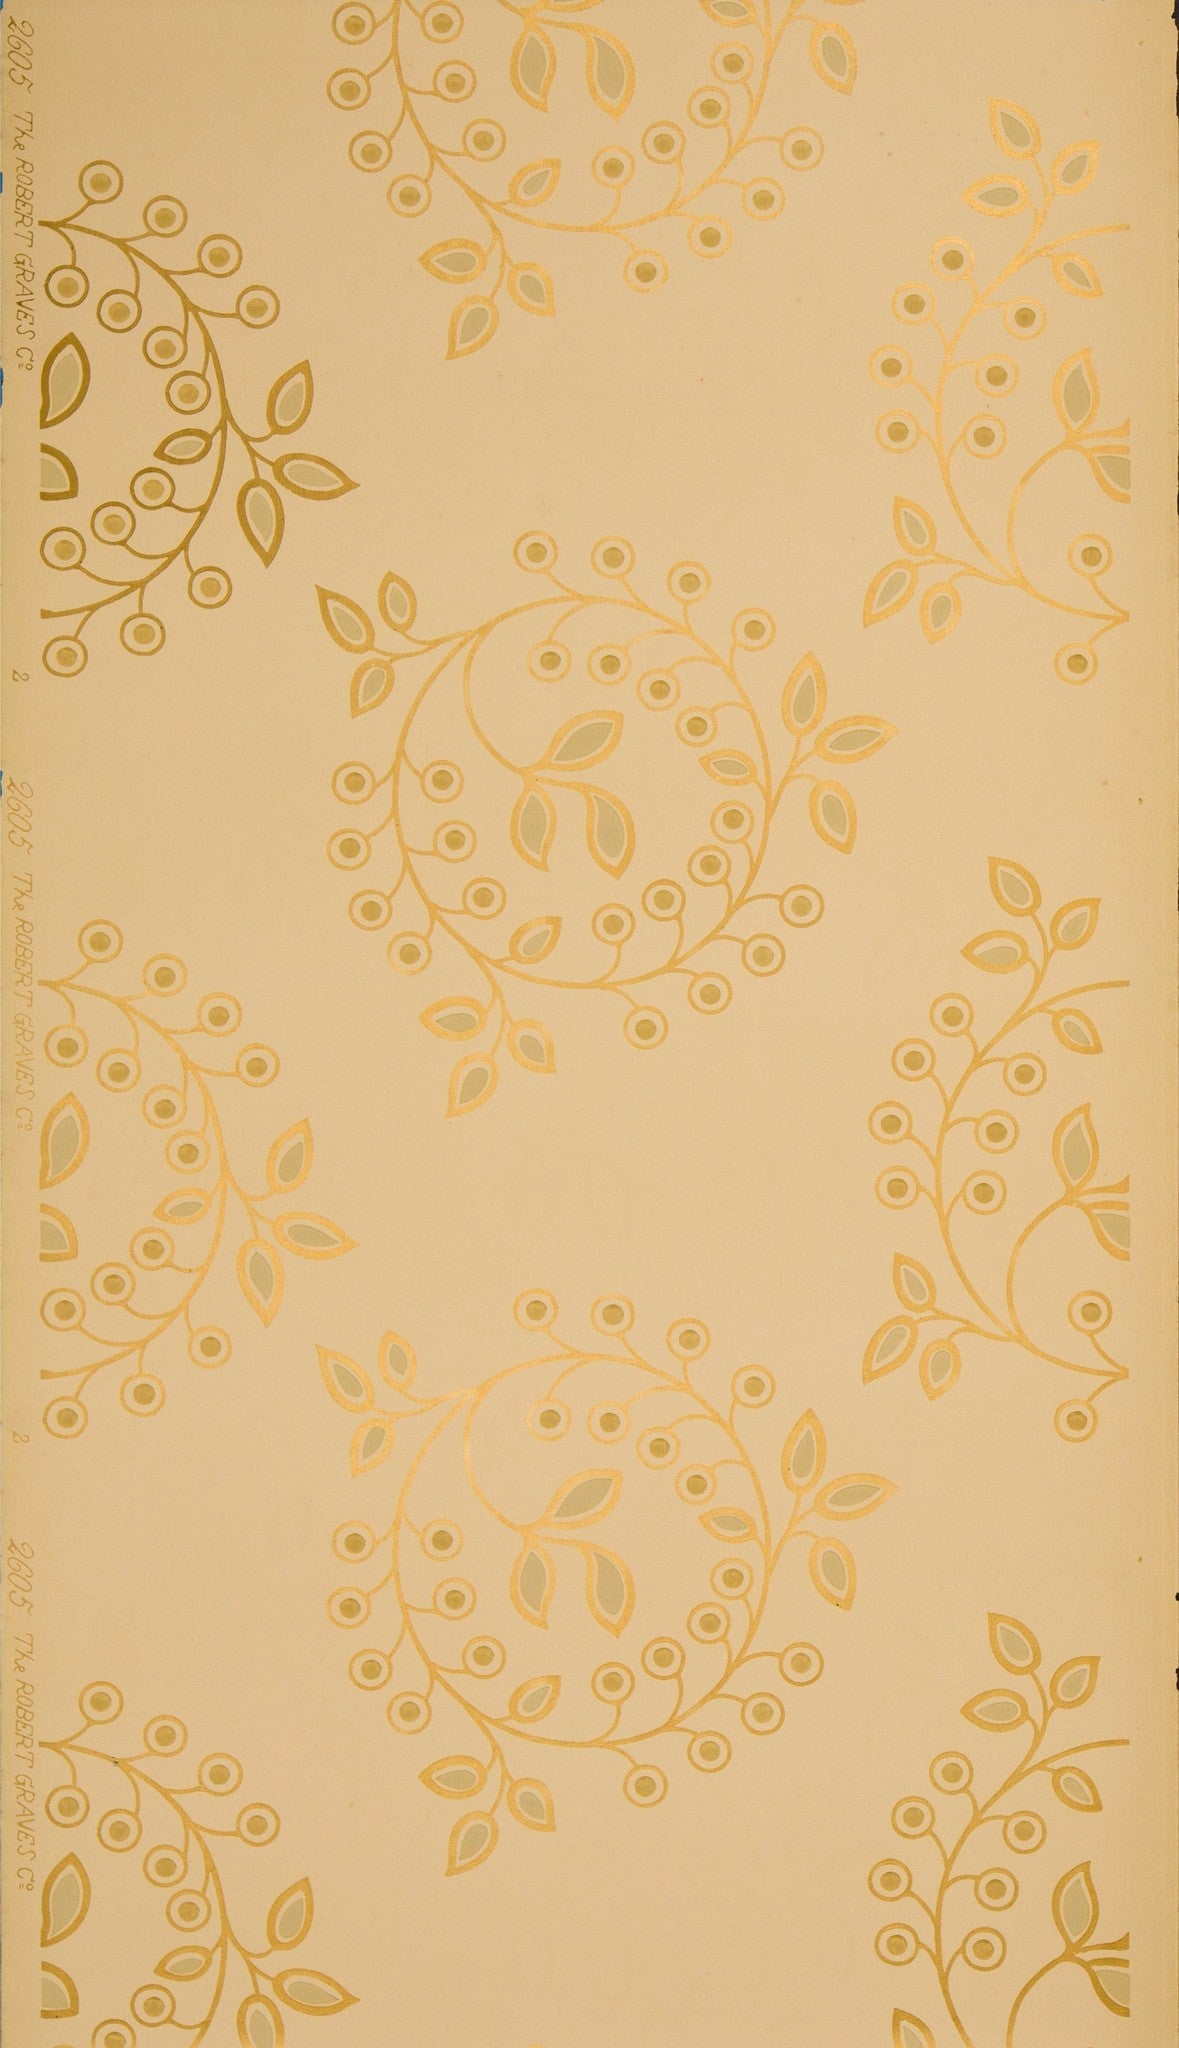 Gilt Circles of Stylized Leaf Forms - Antique Wallpaper Remnant